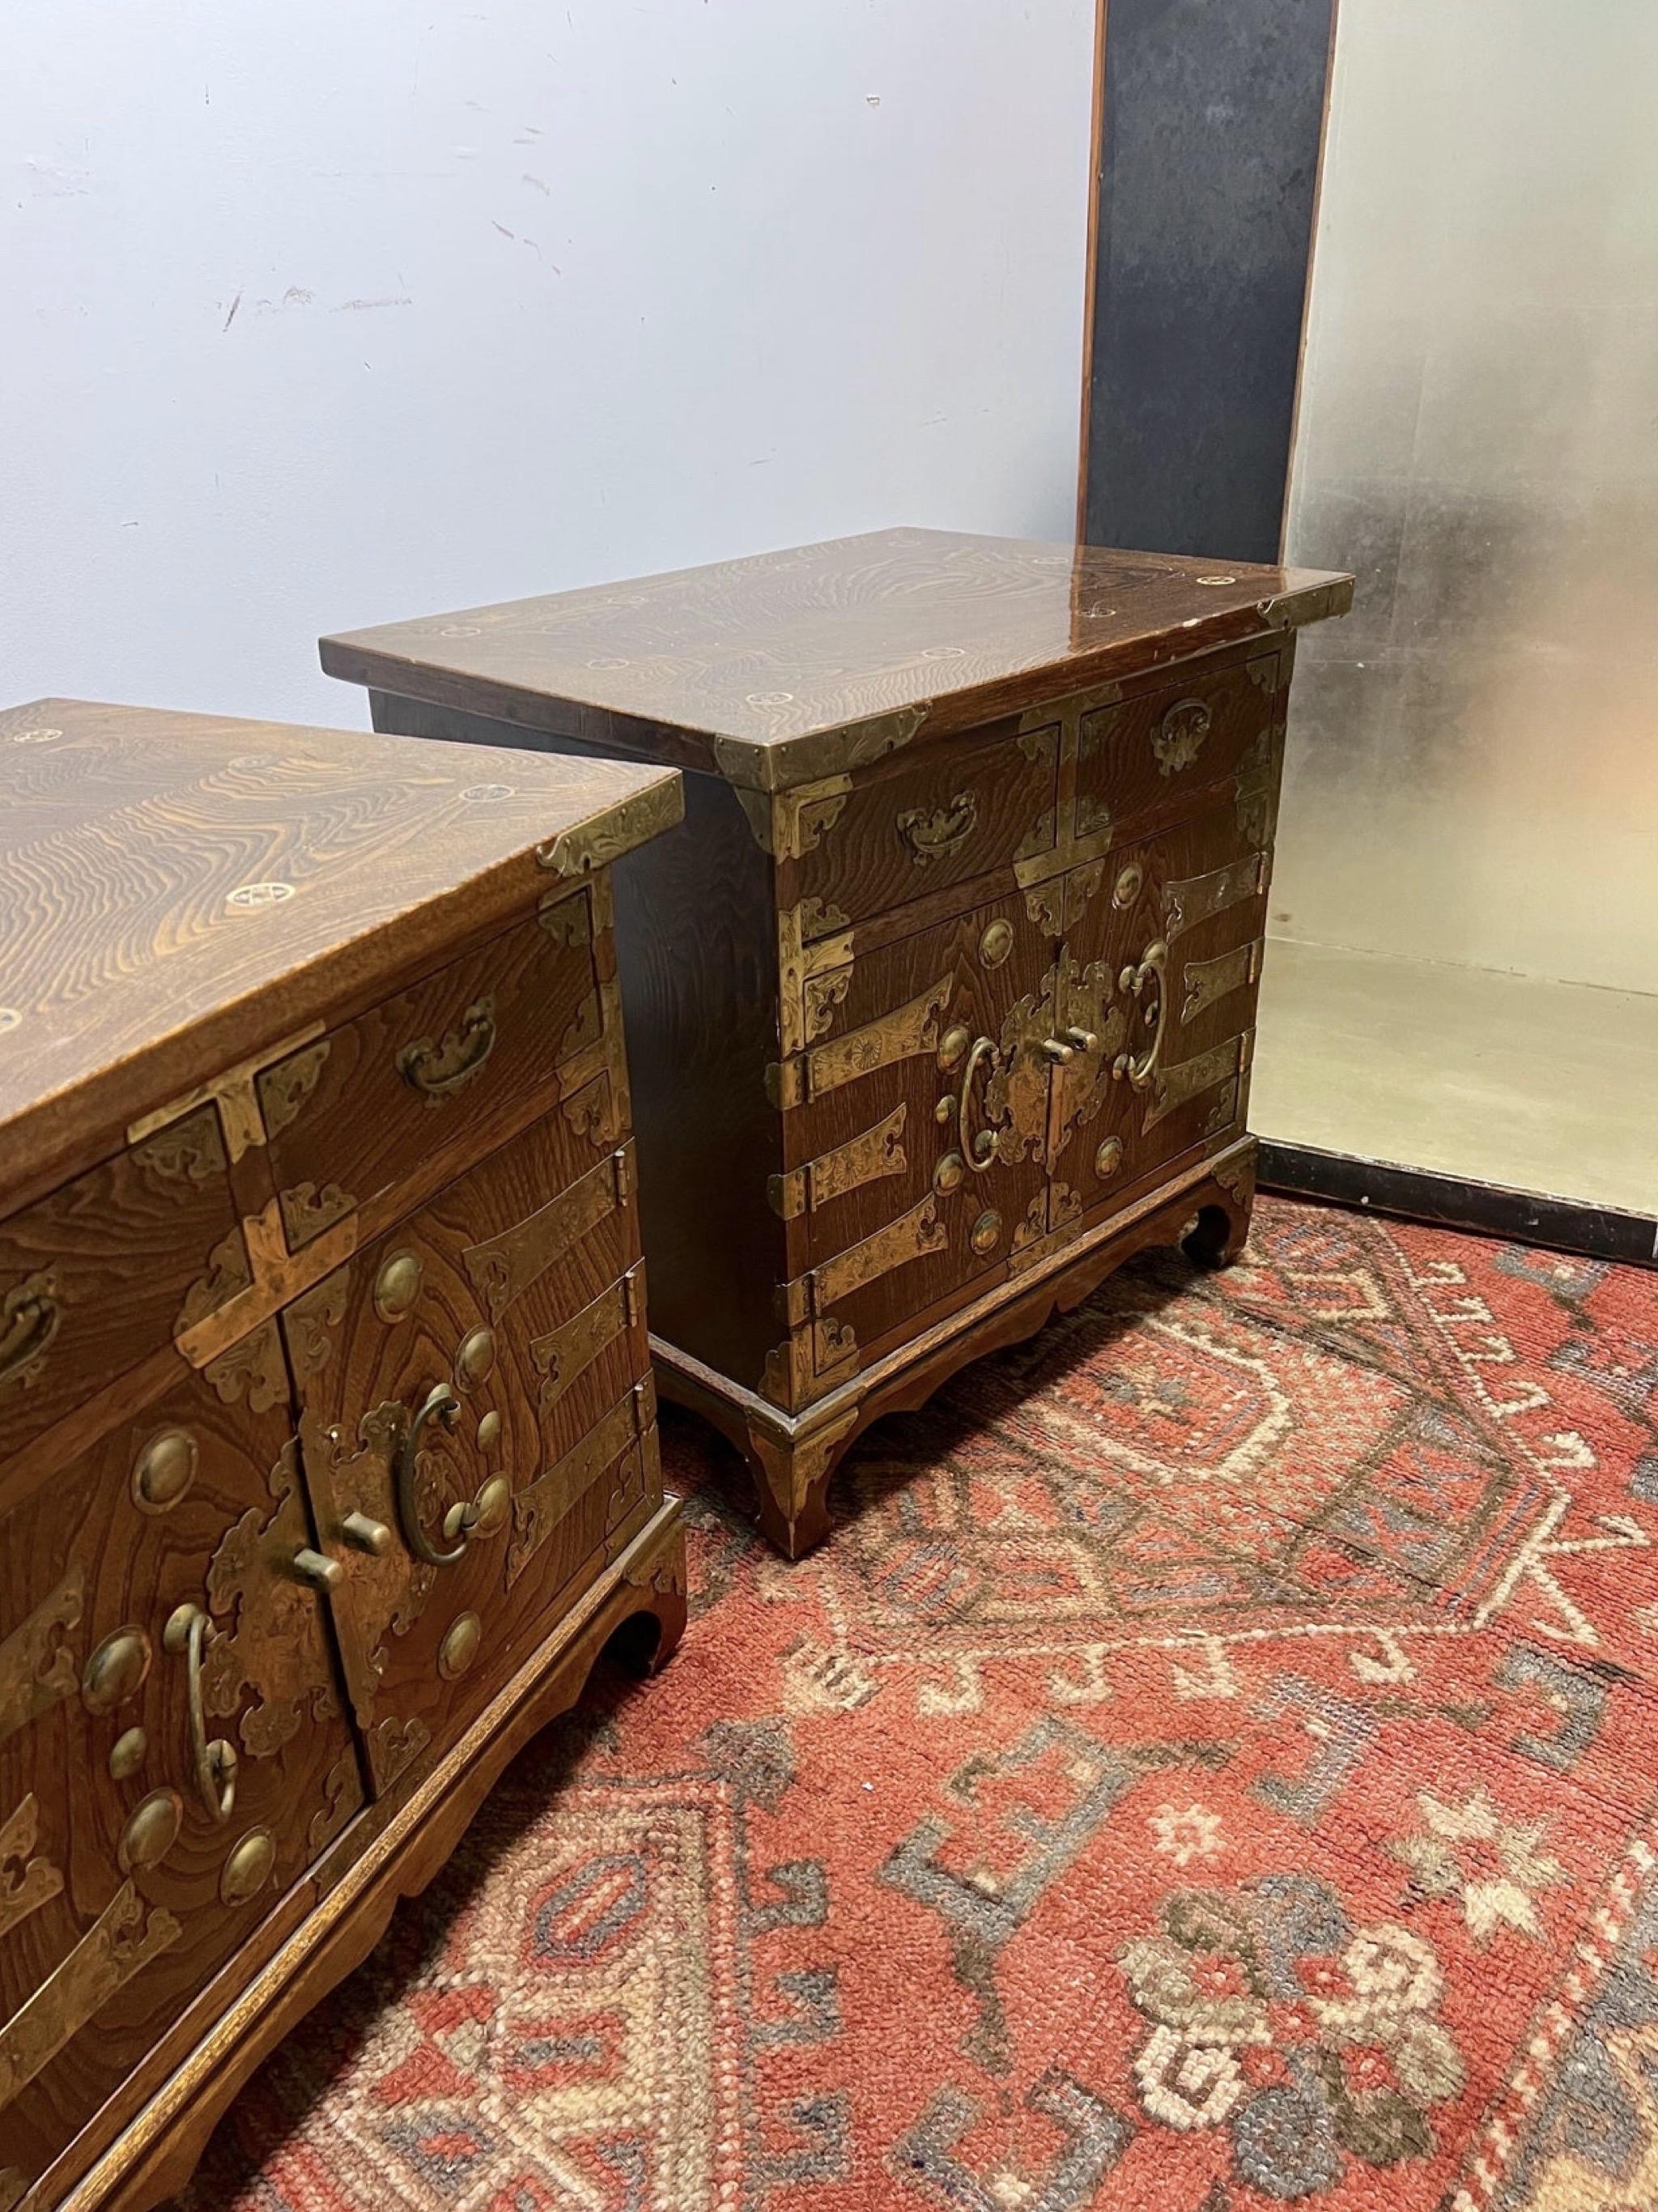 A fantastic pair of antique Chinese Tansu end table or nightstands. They have brass inlay on the tops and nice brass hardware. These solid wood chests have 2 drawers above a 2 door cabinet.